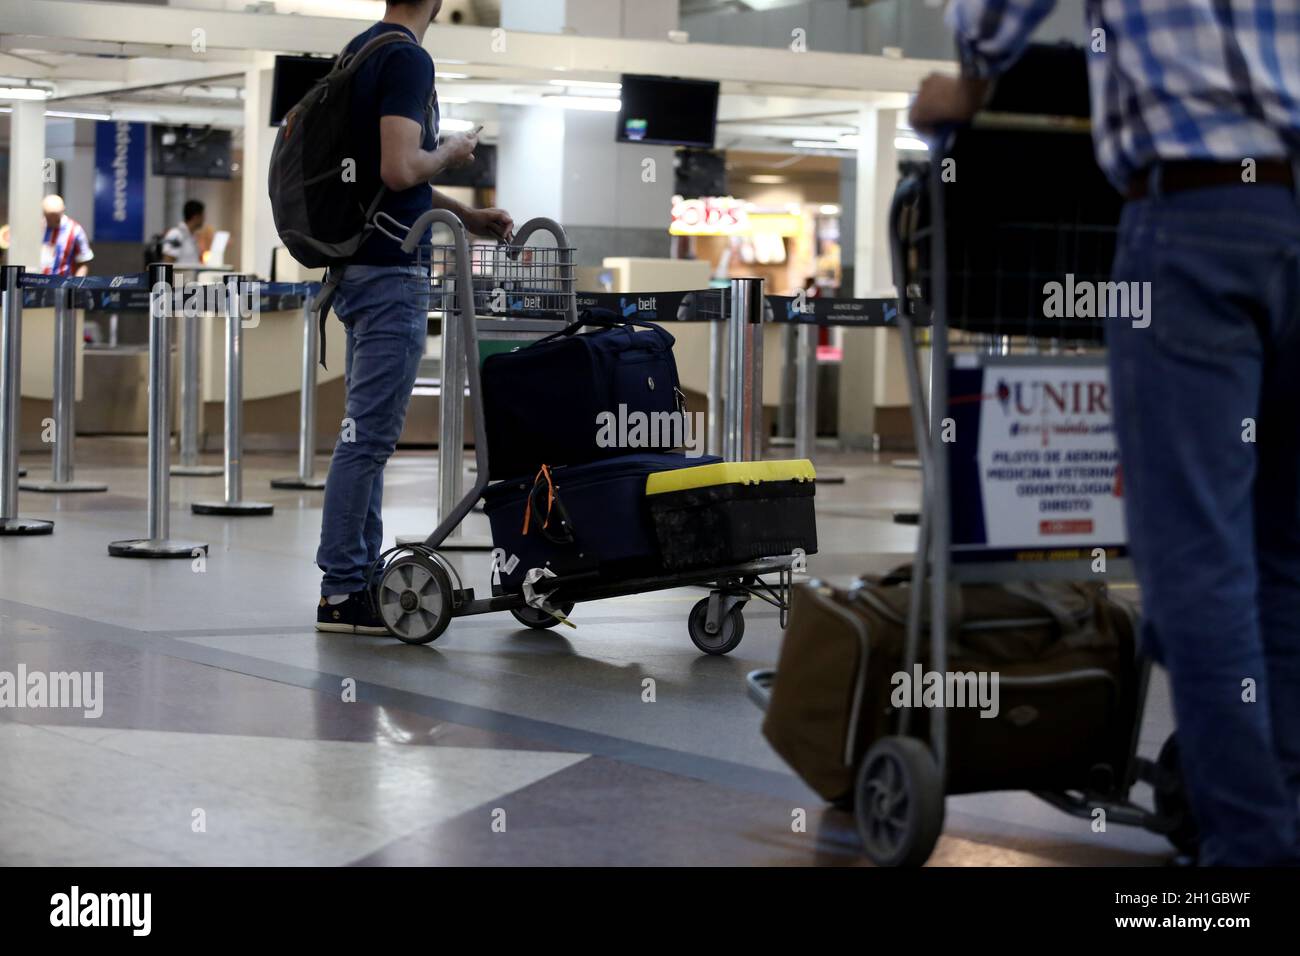 salvador, bahia / brazil - september 22, 2017: passengers are seen poking cart with suitcase in the lobby of the airport of the city of Salvador. *** Stock Photo